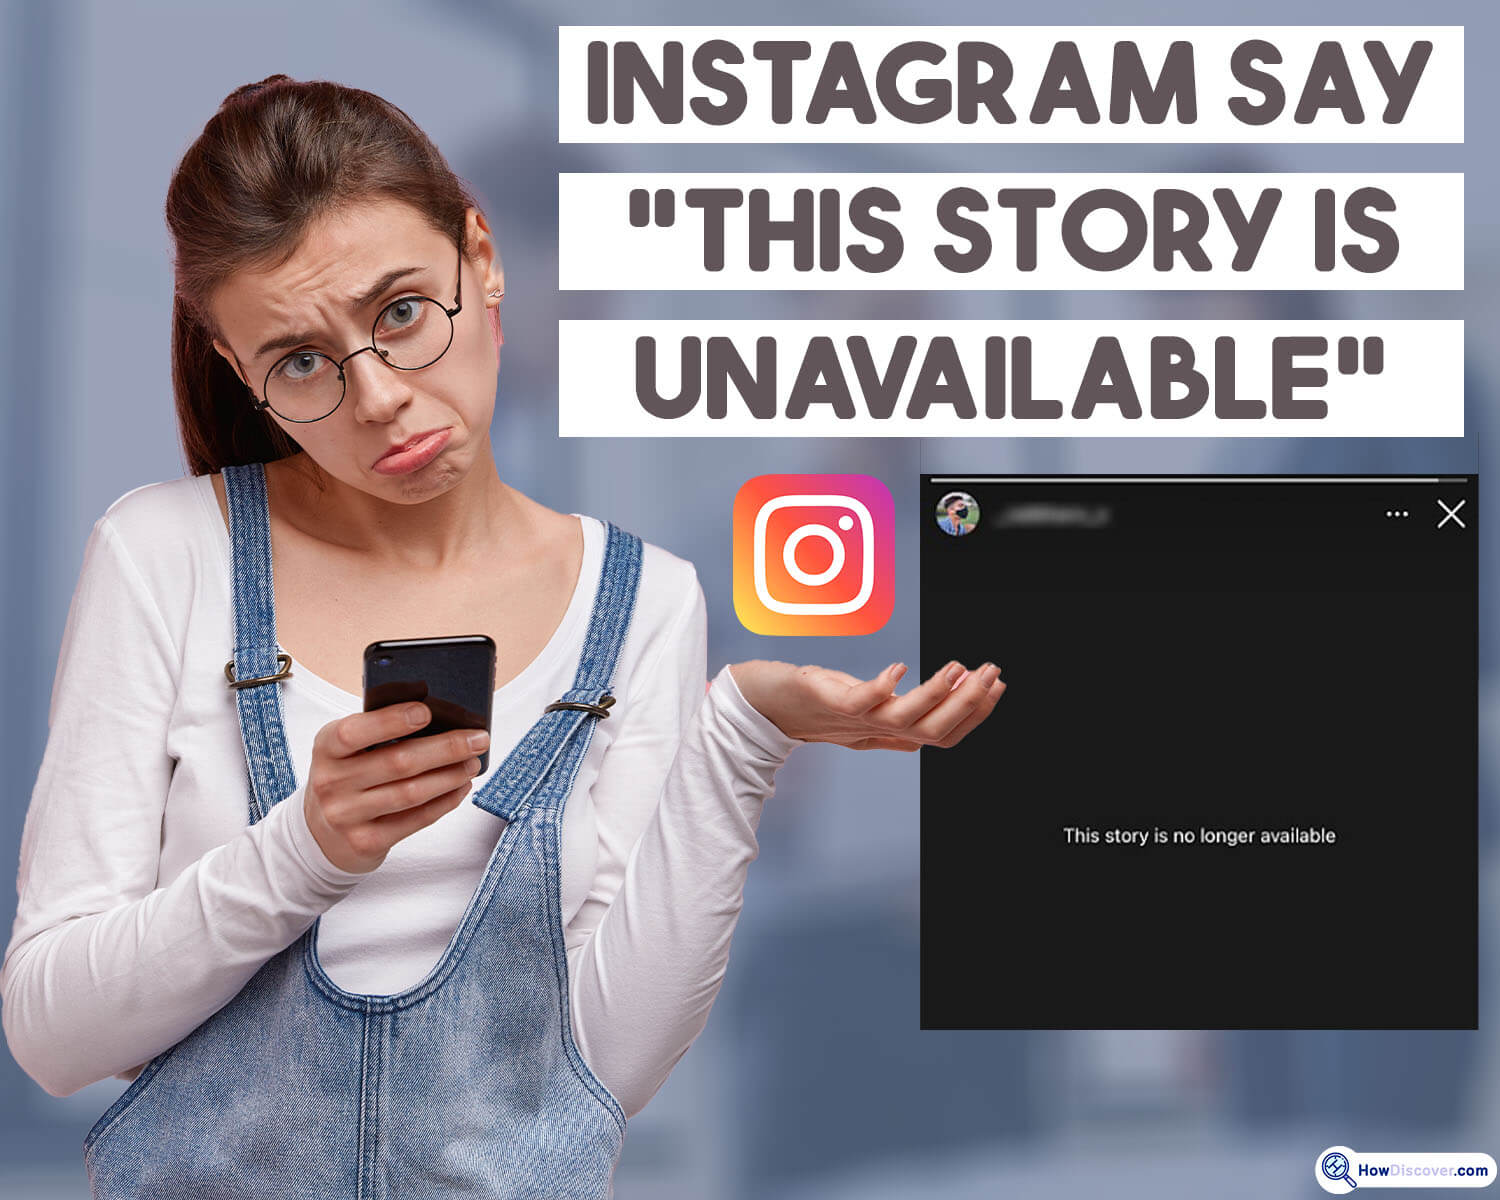 why are some ig stories unavailable - this story is unavailable Instagram - how to see unavailable story on Instagram